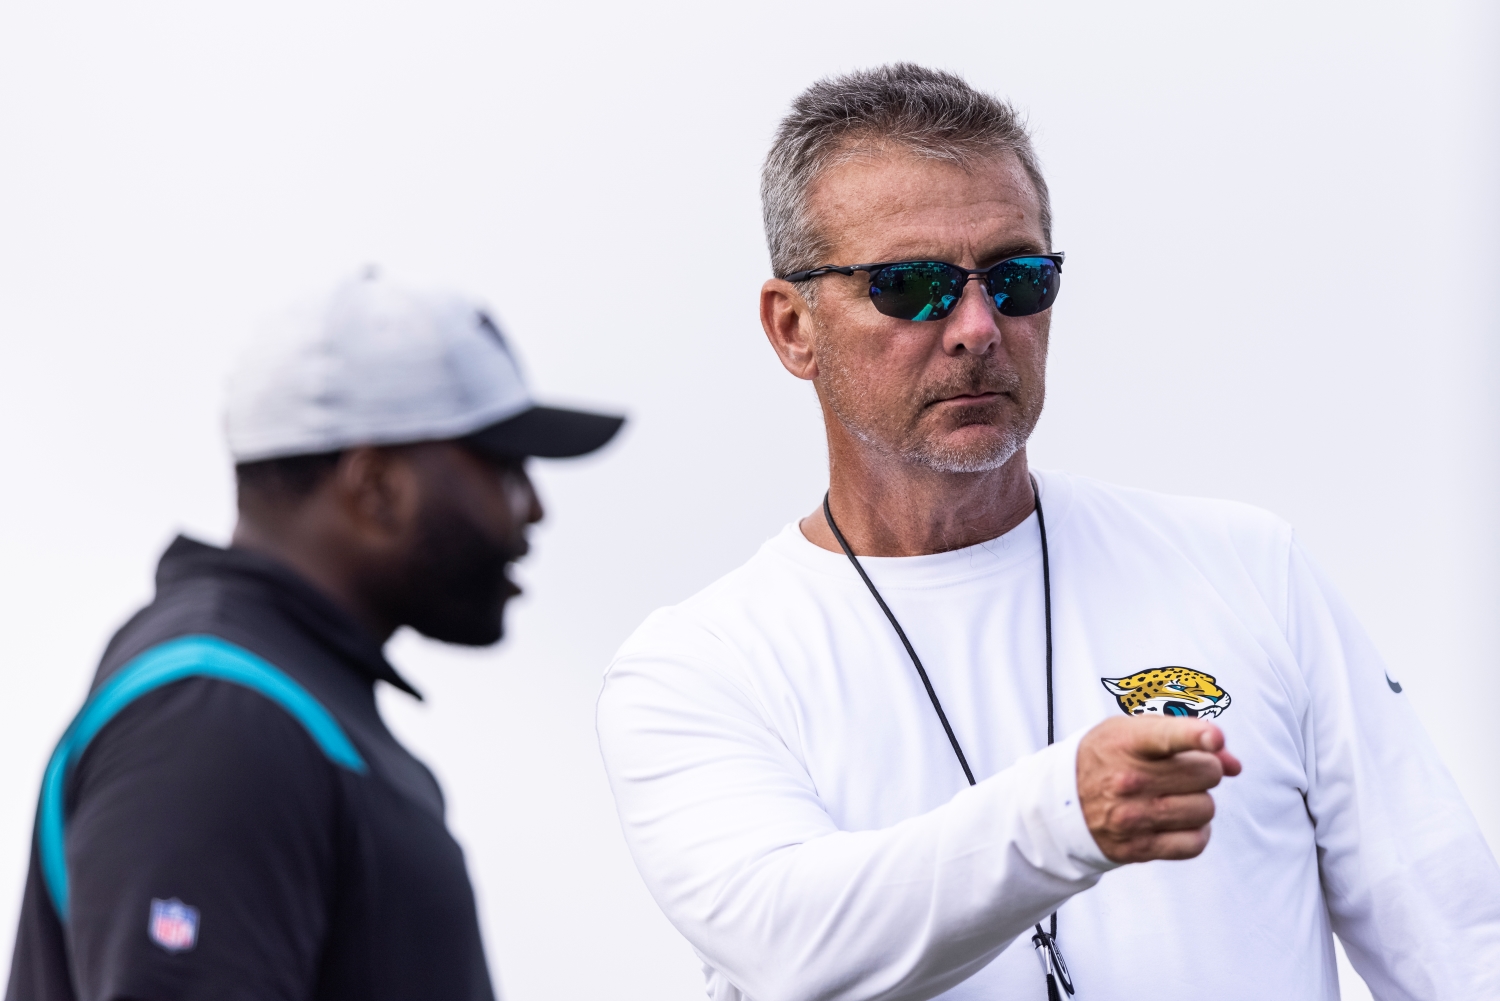 Jacksonville Jaguars head coach Urban Meyer points during a drill.,